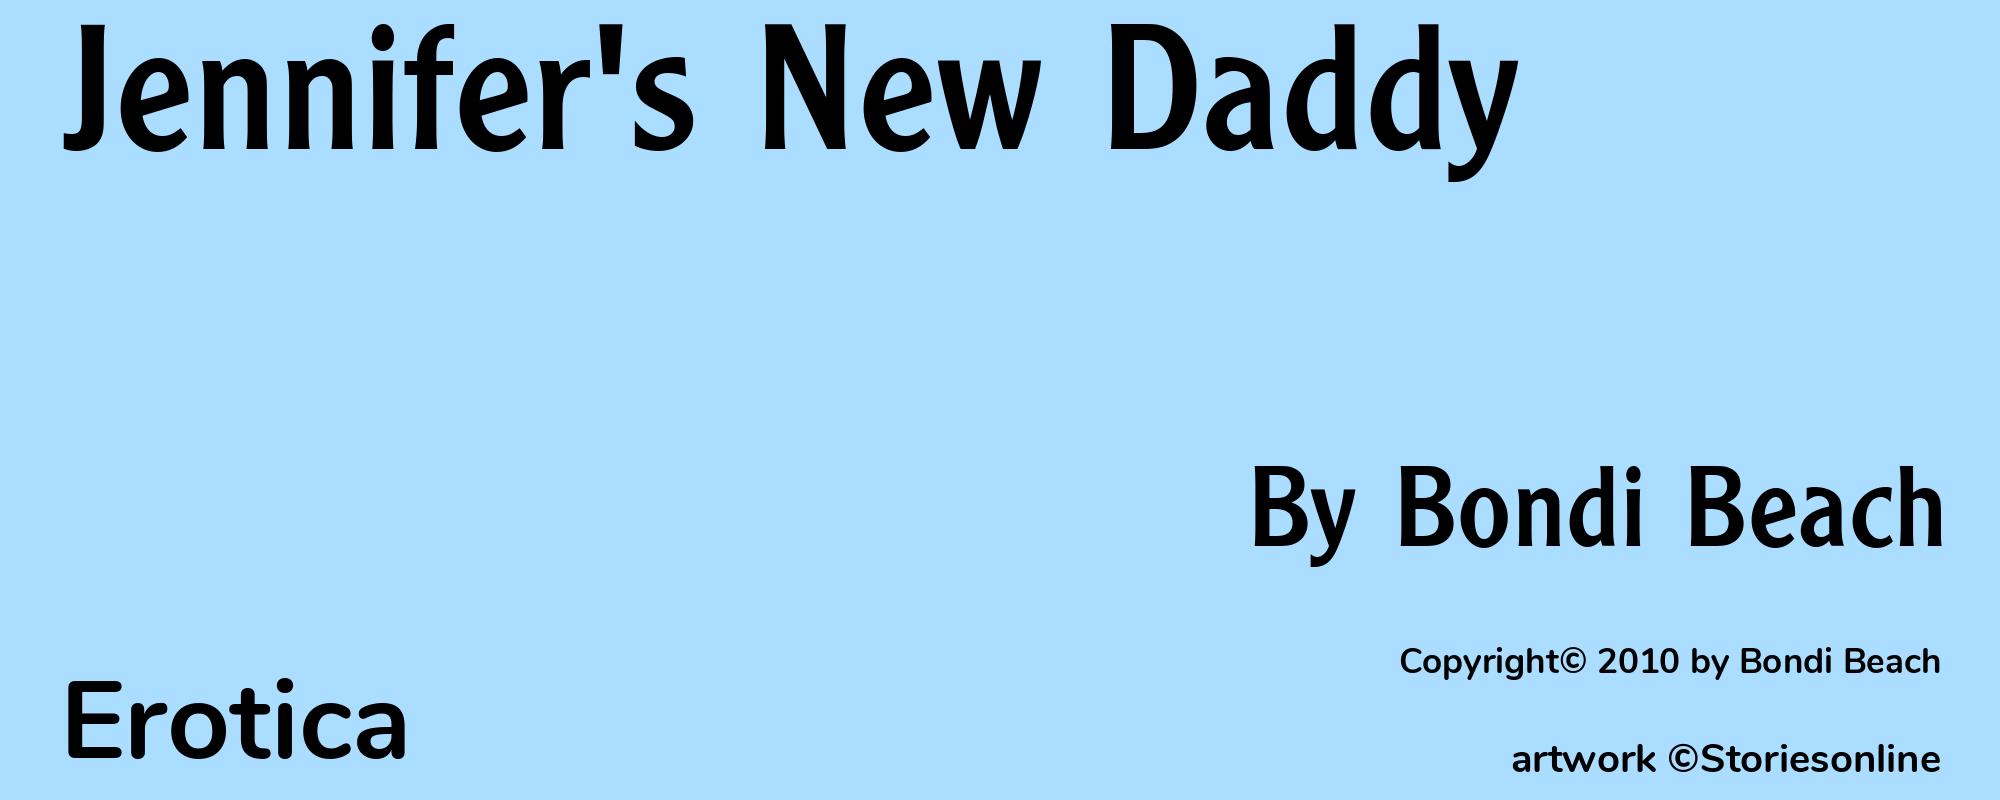 Jennifer's New Daddy - Cover